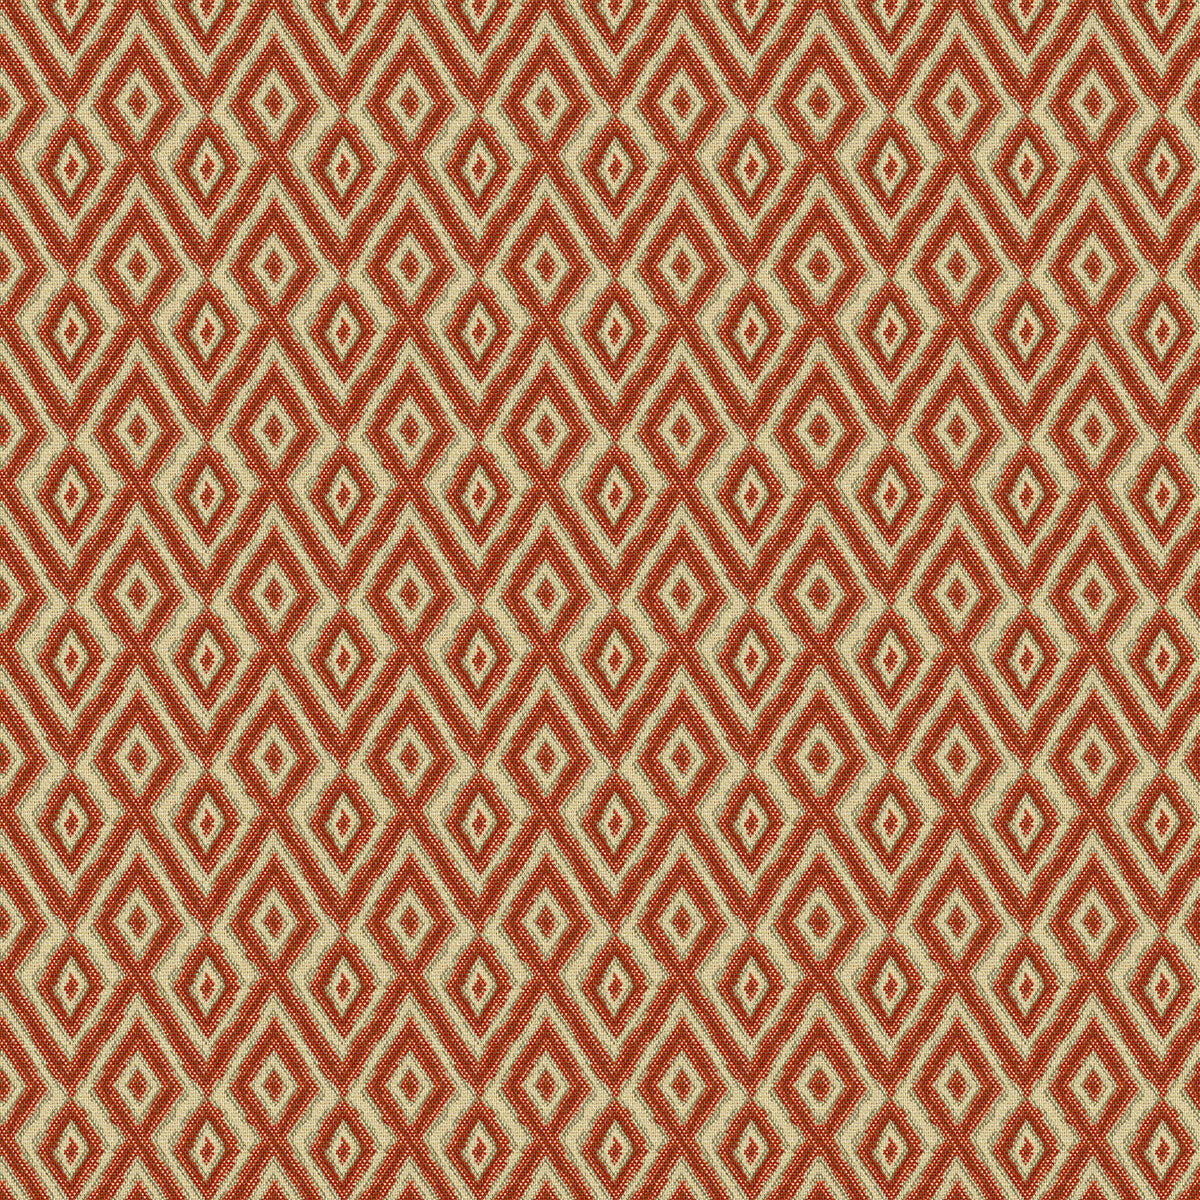 Kravet Design fabric in 33881-1612 color - pattern 33881.1612.0 - by Kravet Design in the Tanzania J Banks collection